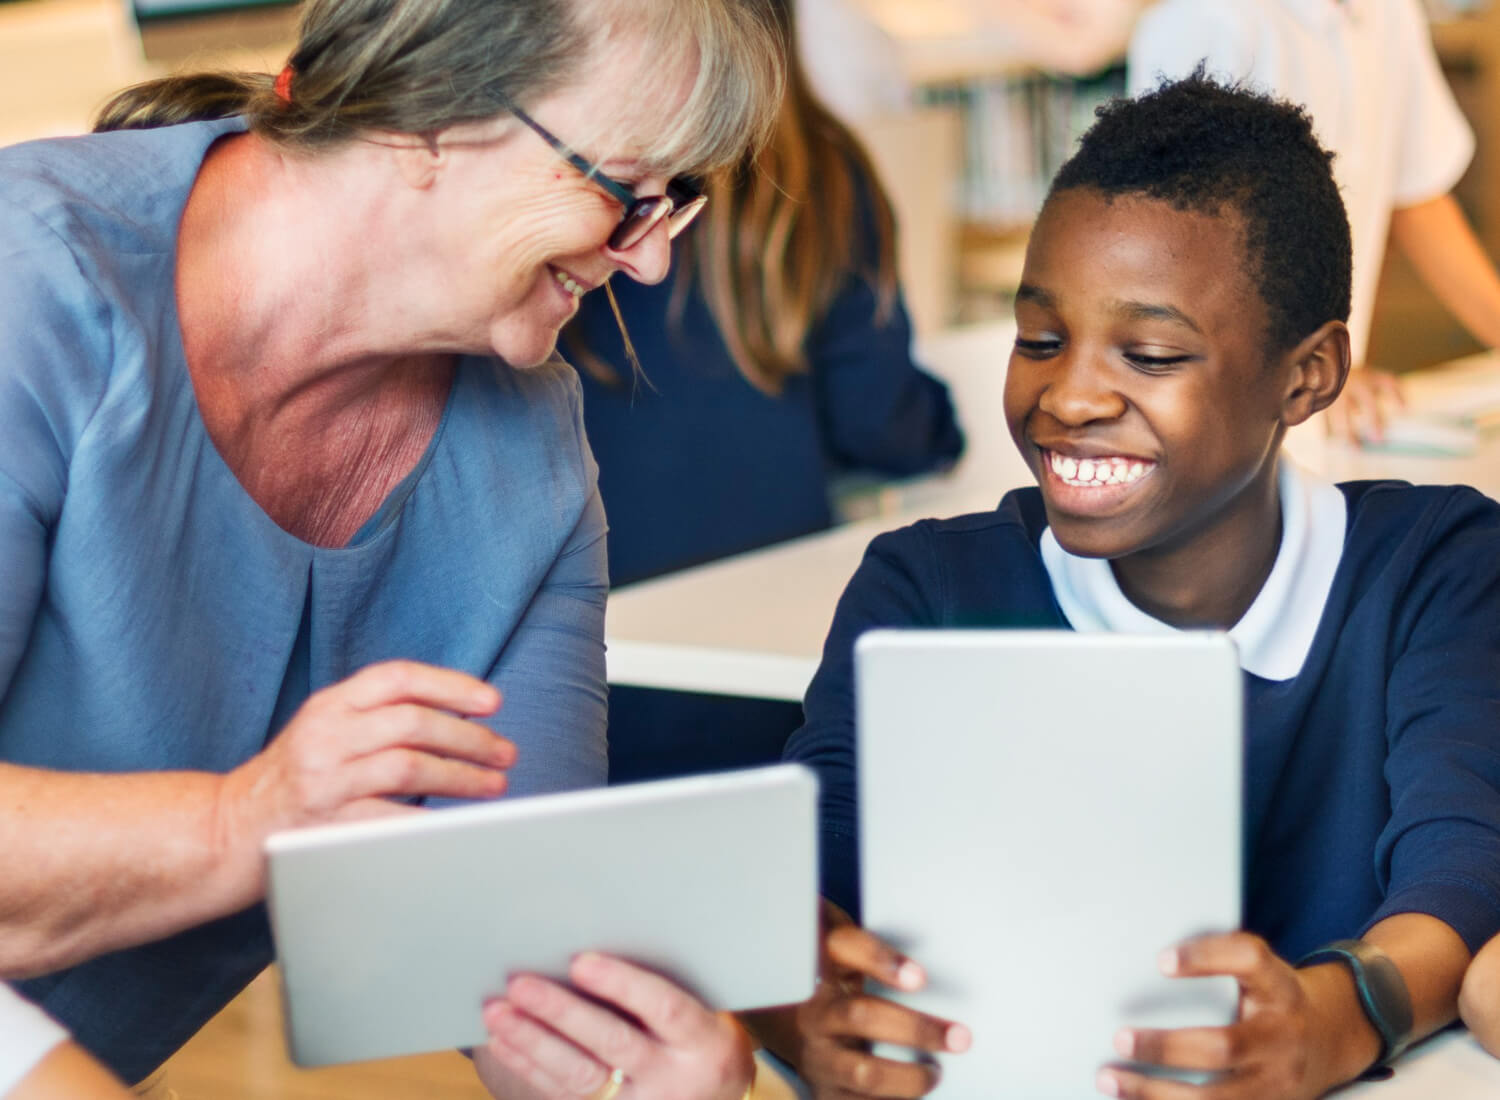 Challenges and benefits of integrating technology in the classroom